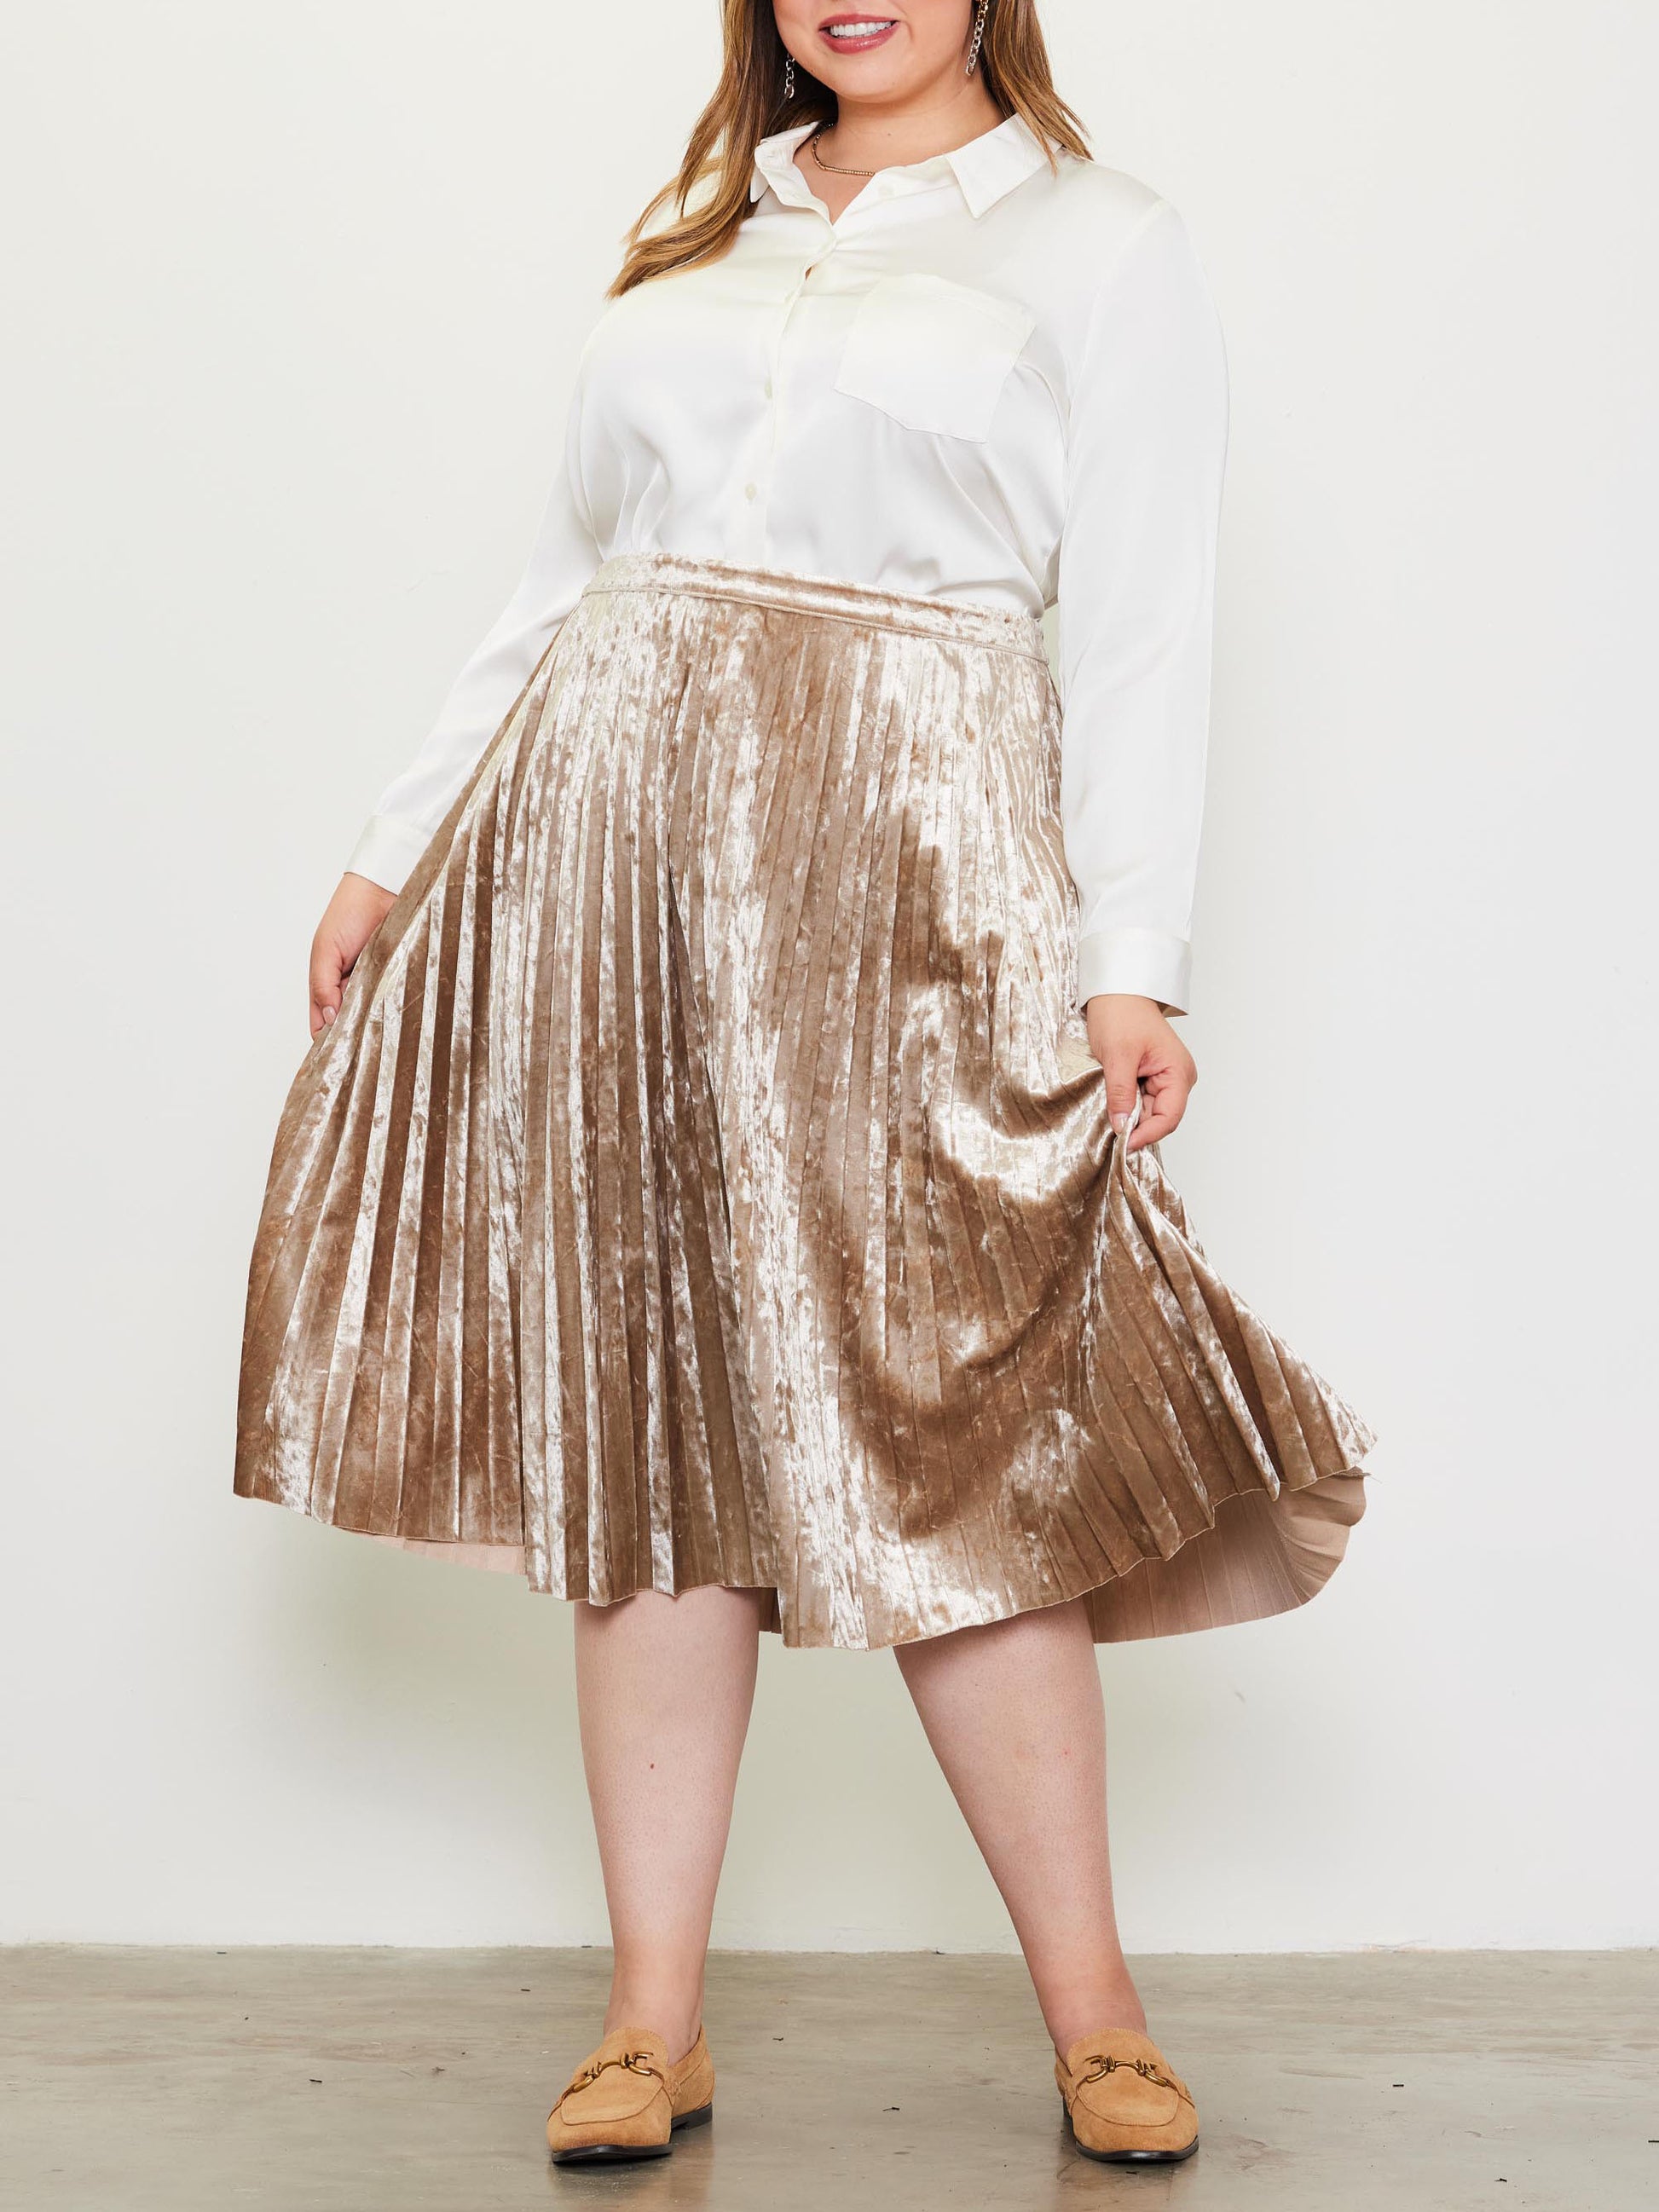 Women's Plus Size - Crushed Velvet Midi Skirt Champagne / 3X by Skies Are Blue